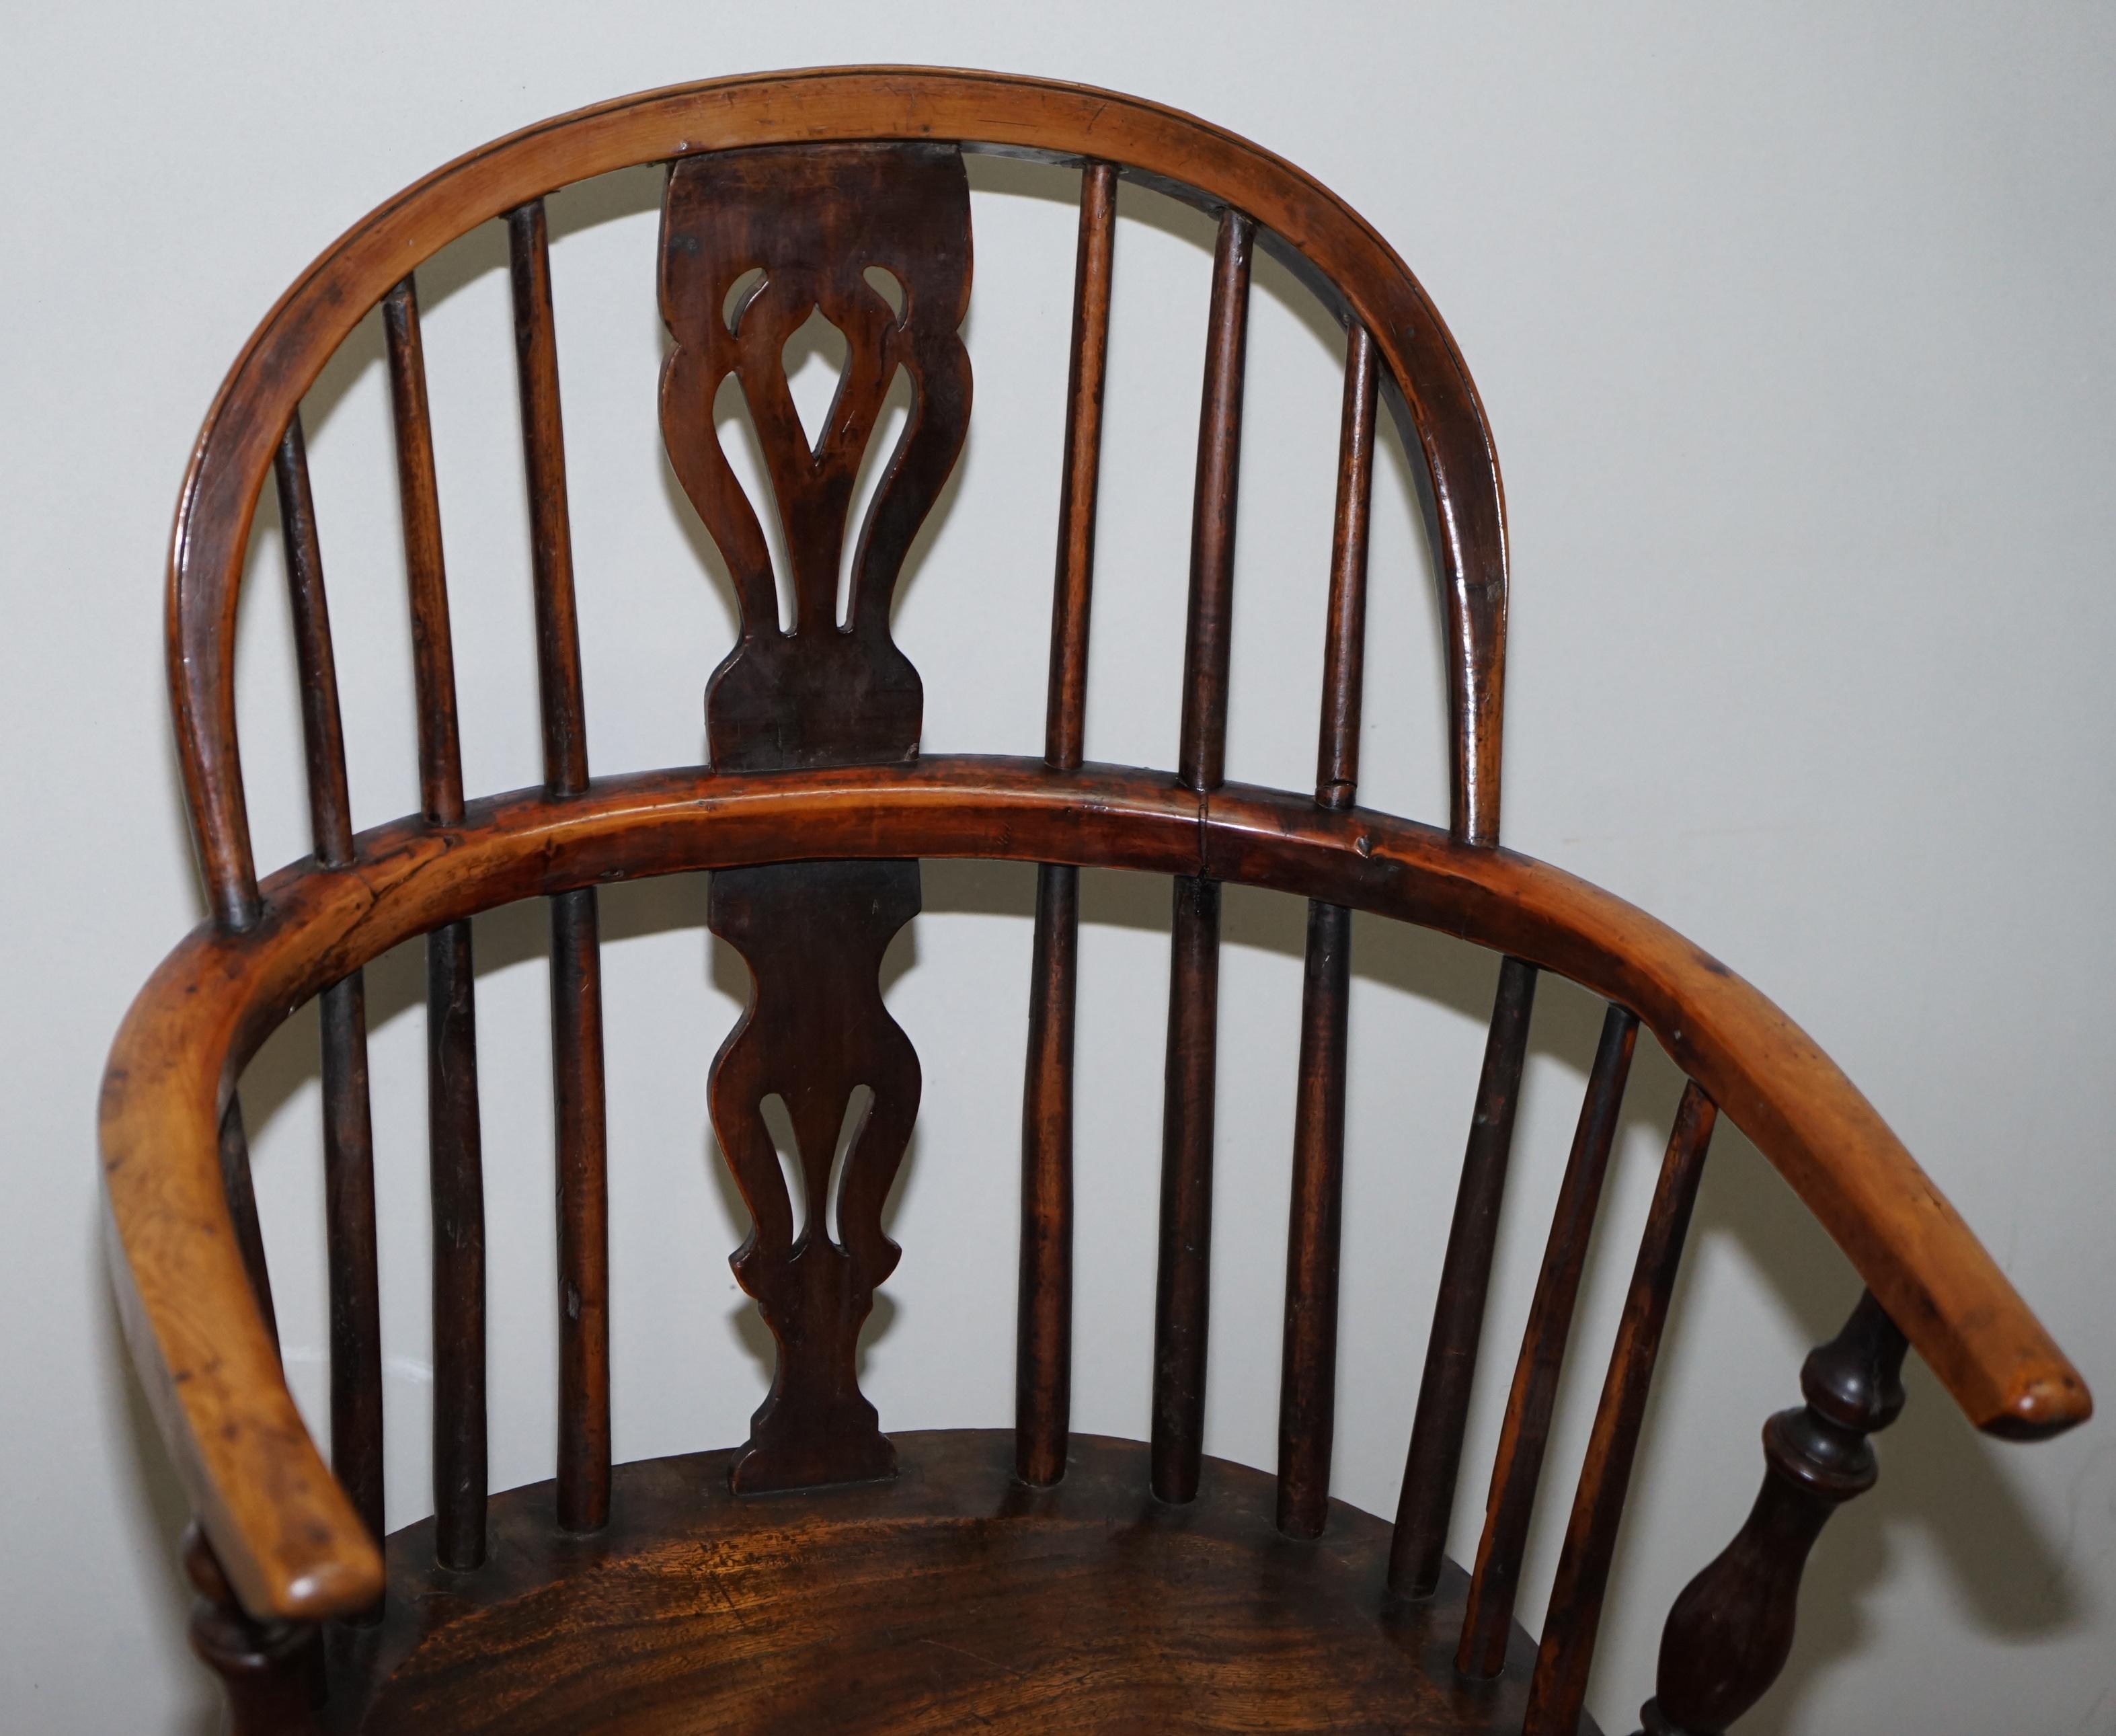 Hand-Crafted 1 of 6 Solid Elm Windsor Armchairs circa 1860 English Countryhouse Furniture For Sale